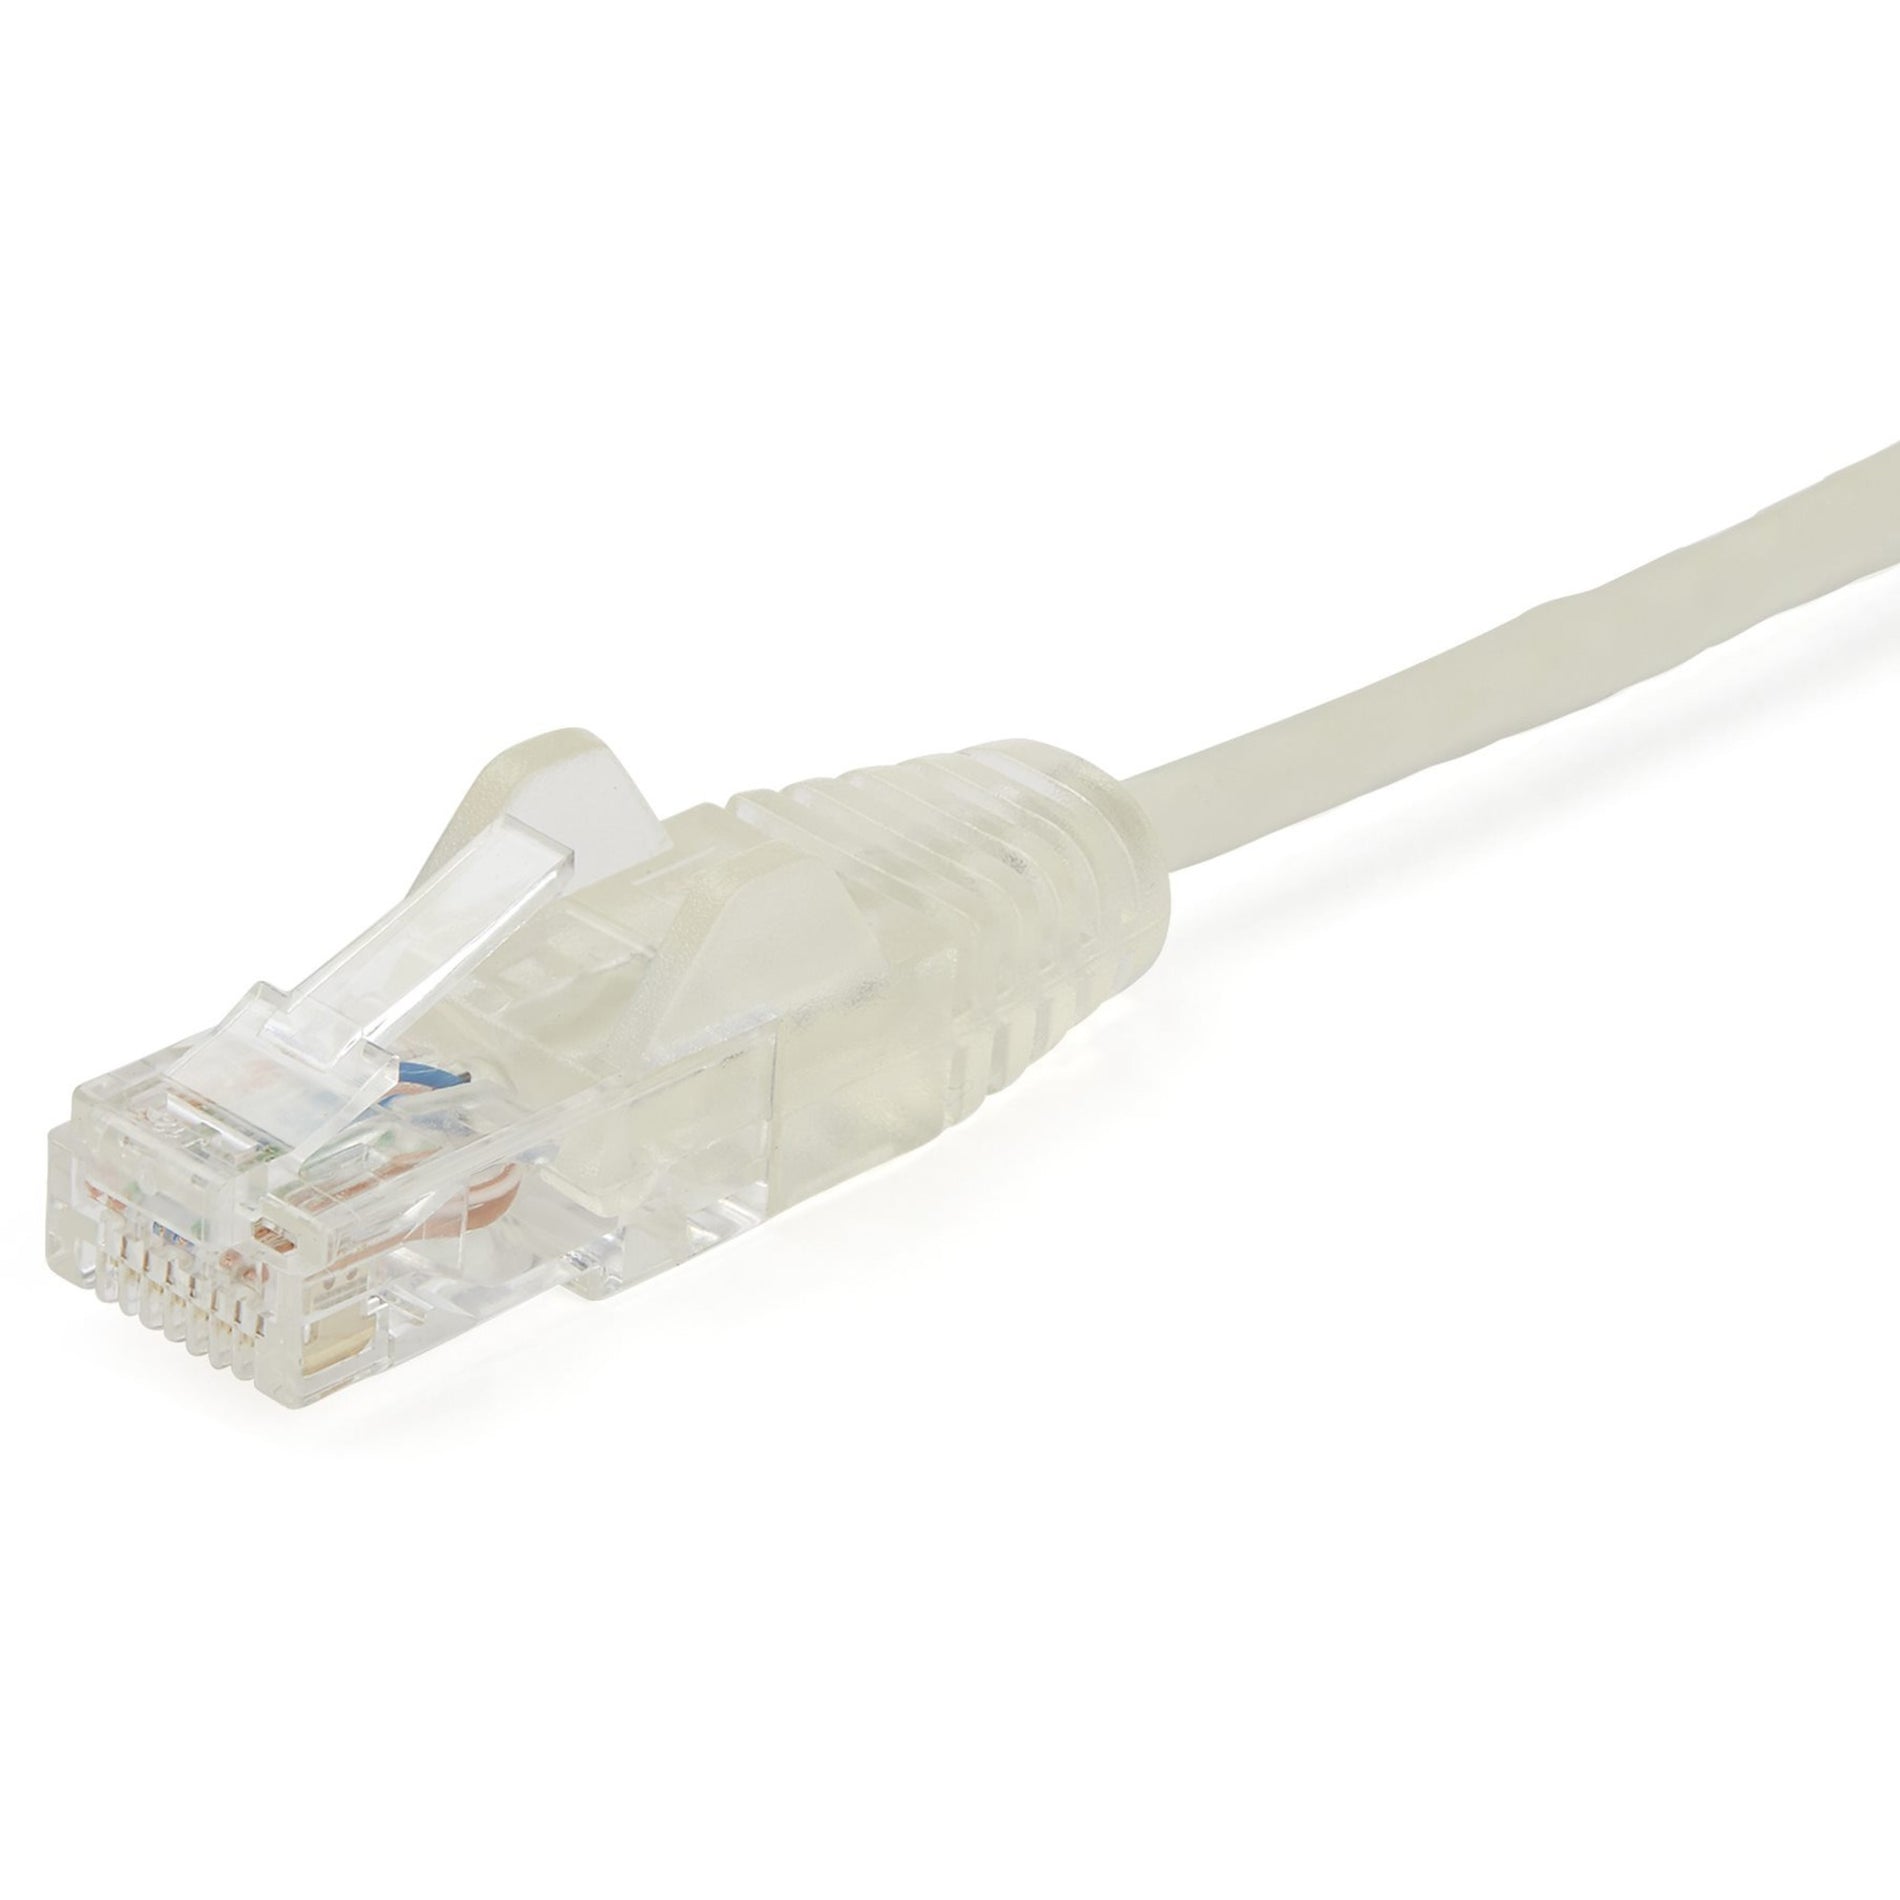 StarTech.com N6PAT6GRS Cat6 Patch Network Cable, 6 ft Gray Ethernet Cable - Slim, Snagless RJ45 Connectors, Cat6 Cable, Cat6 Patch Cable, Cat6 Network Cable